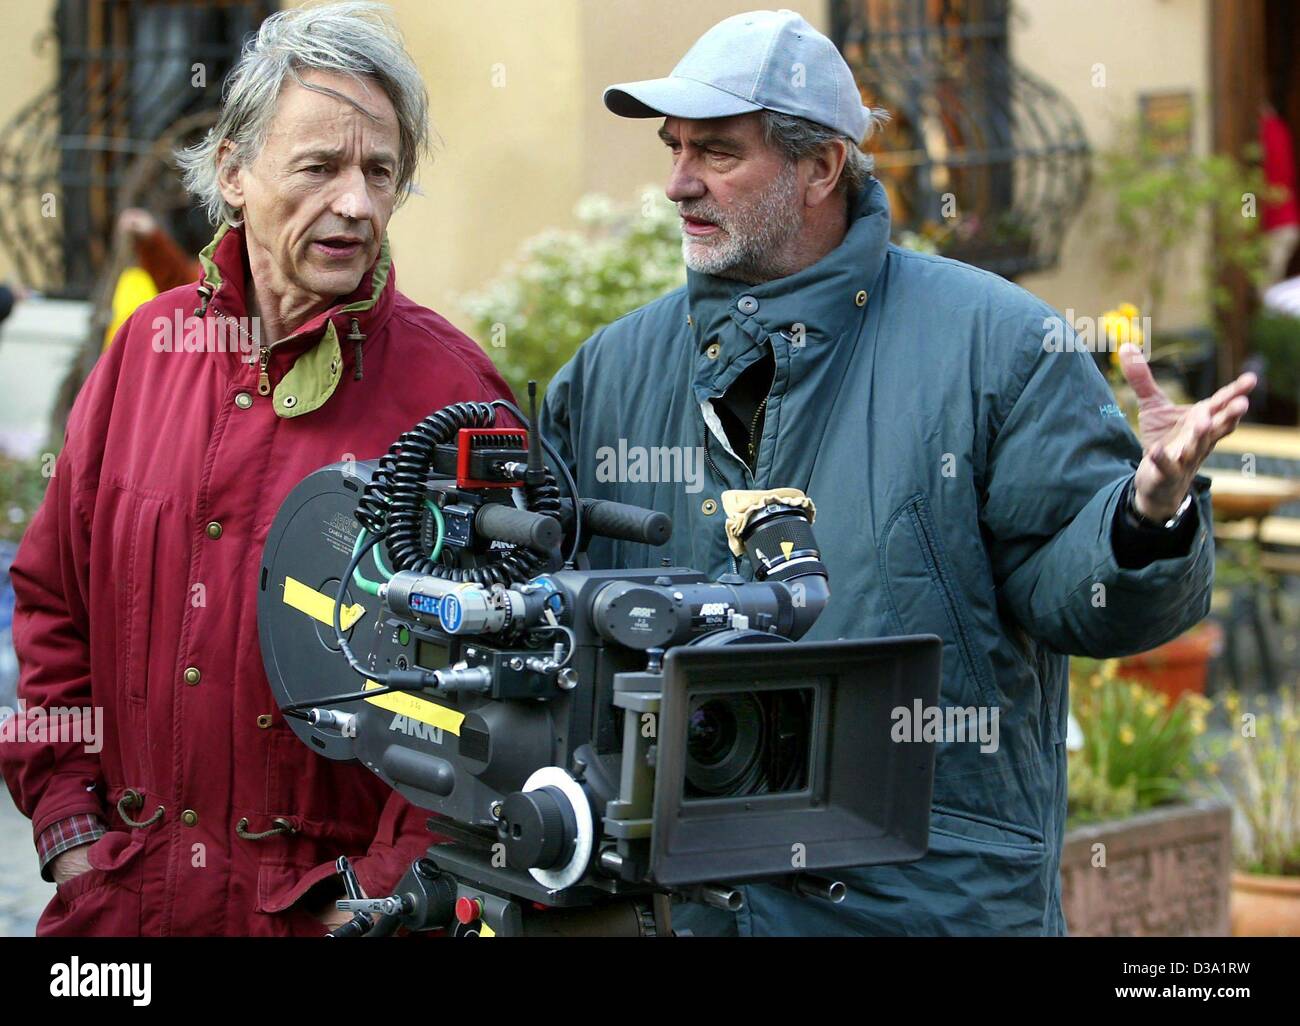 (dpa) - German film director Edgar Reitz (R) working with his director of photography Thomas Mauch on a new sequel of his TV series 'Heimat' in Oberwesel, Germany, 5 April 2002. Reitz won international fame with his first sequels of 'Heimat' (homeland). Stock Photo